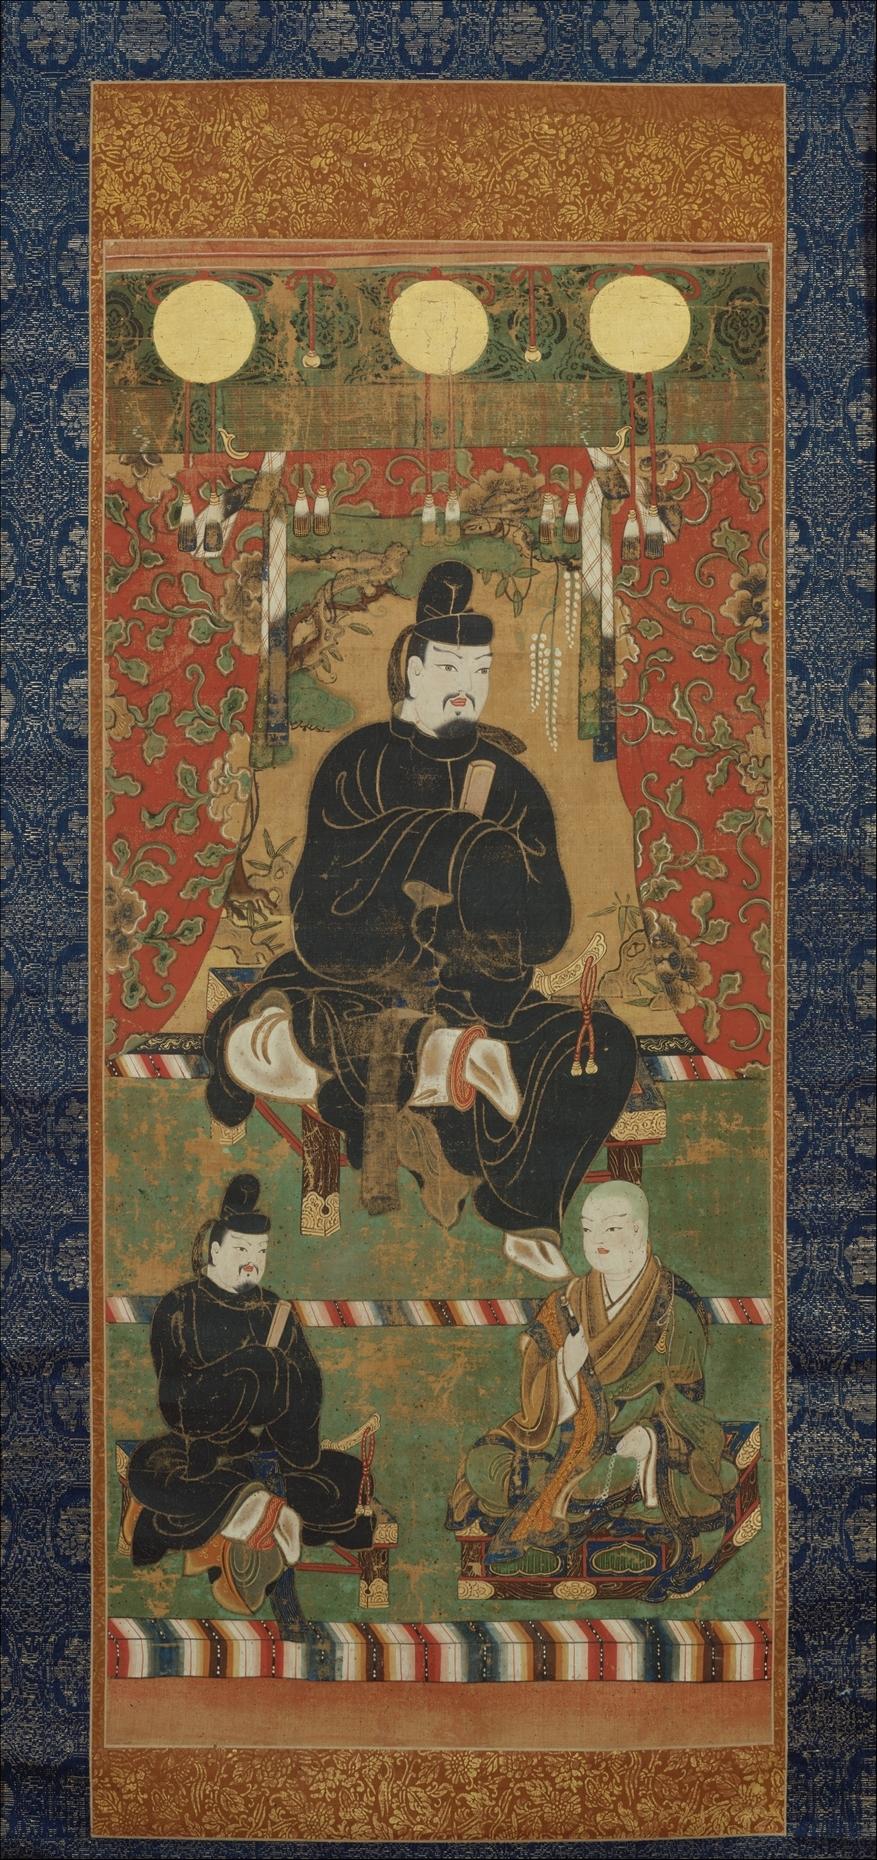 “Fujiwara no Kamatari as a Shinto Deity,” Nanbokucho period (1336–92), after 1350. Fujiwara no Kamatari (614–699) is one of several historical figures deified in the religious tradition of Shinto. An important statesman and courtier, he founded the powerful Fujiwara clan that dominated Japanese court life from the 10th through the 12th century. Purchase, bequests of Edward C. Moore and Bruce Webster, by exchange, and gifts of Mrs. George A. Crocker and David Murray, by exchange, 1985. (The Metropolitan Museum of Art)